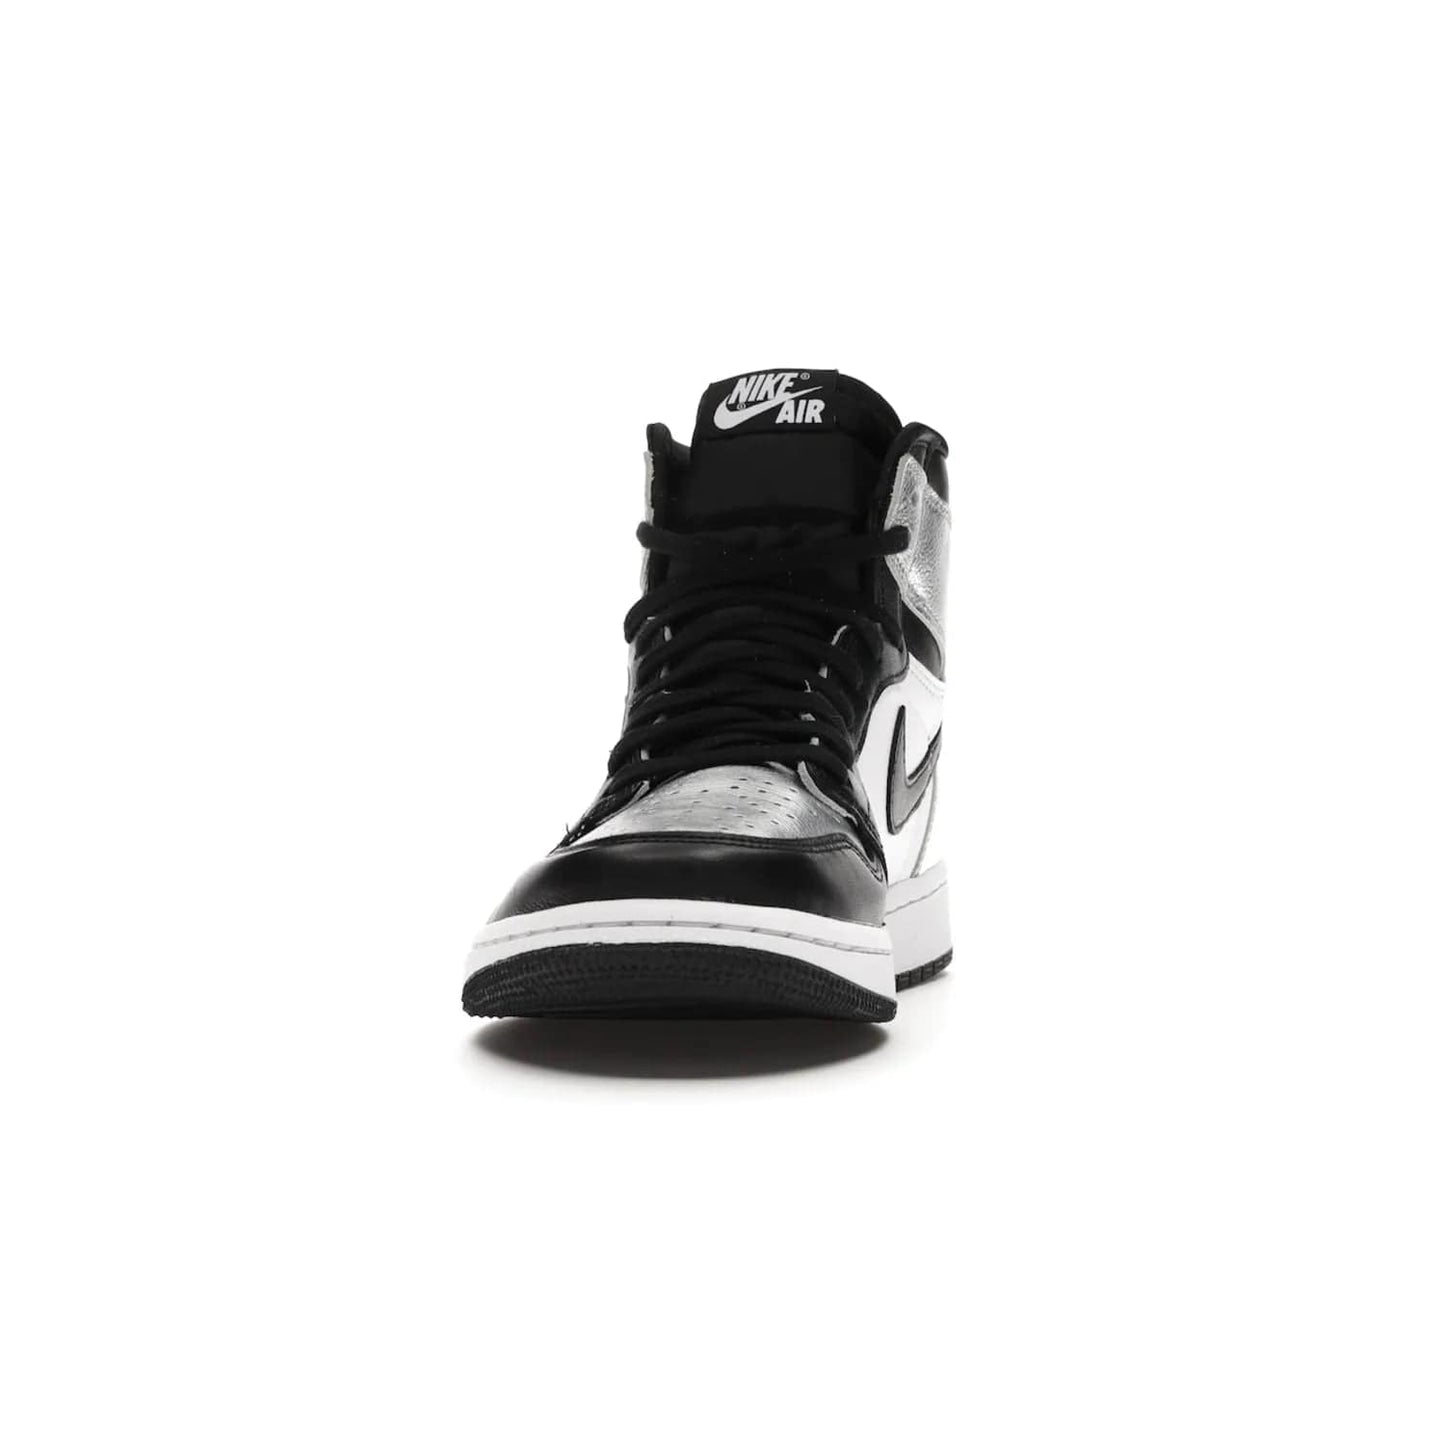 Jordan 1 Retro High Silver Toe (Women's) - Image 11 - Only at www.BallersClubKickz.com - Introducing the Jordan 1 Retro High Silver Toe (Women's): an updated spin on the iconic 'Black Toe' theme. Featuring white & black leather and silver patent leather construction. Nike Air branding, Air Jordan Wings logo, and white/black sole finish give a classic look. The perfect addition to an on-trend streetwear look. Available in classic black & white, this Jordan 1 is an instant classic. Released in February 20